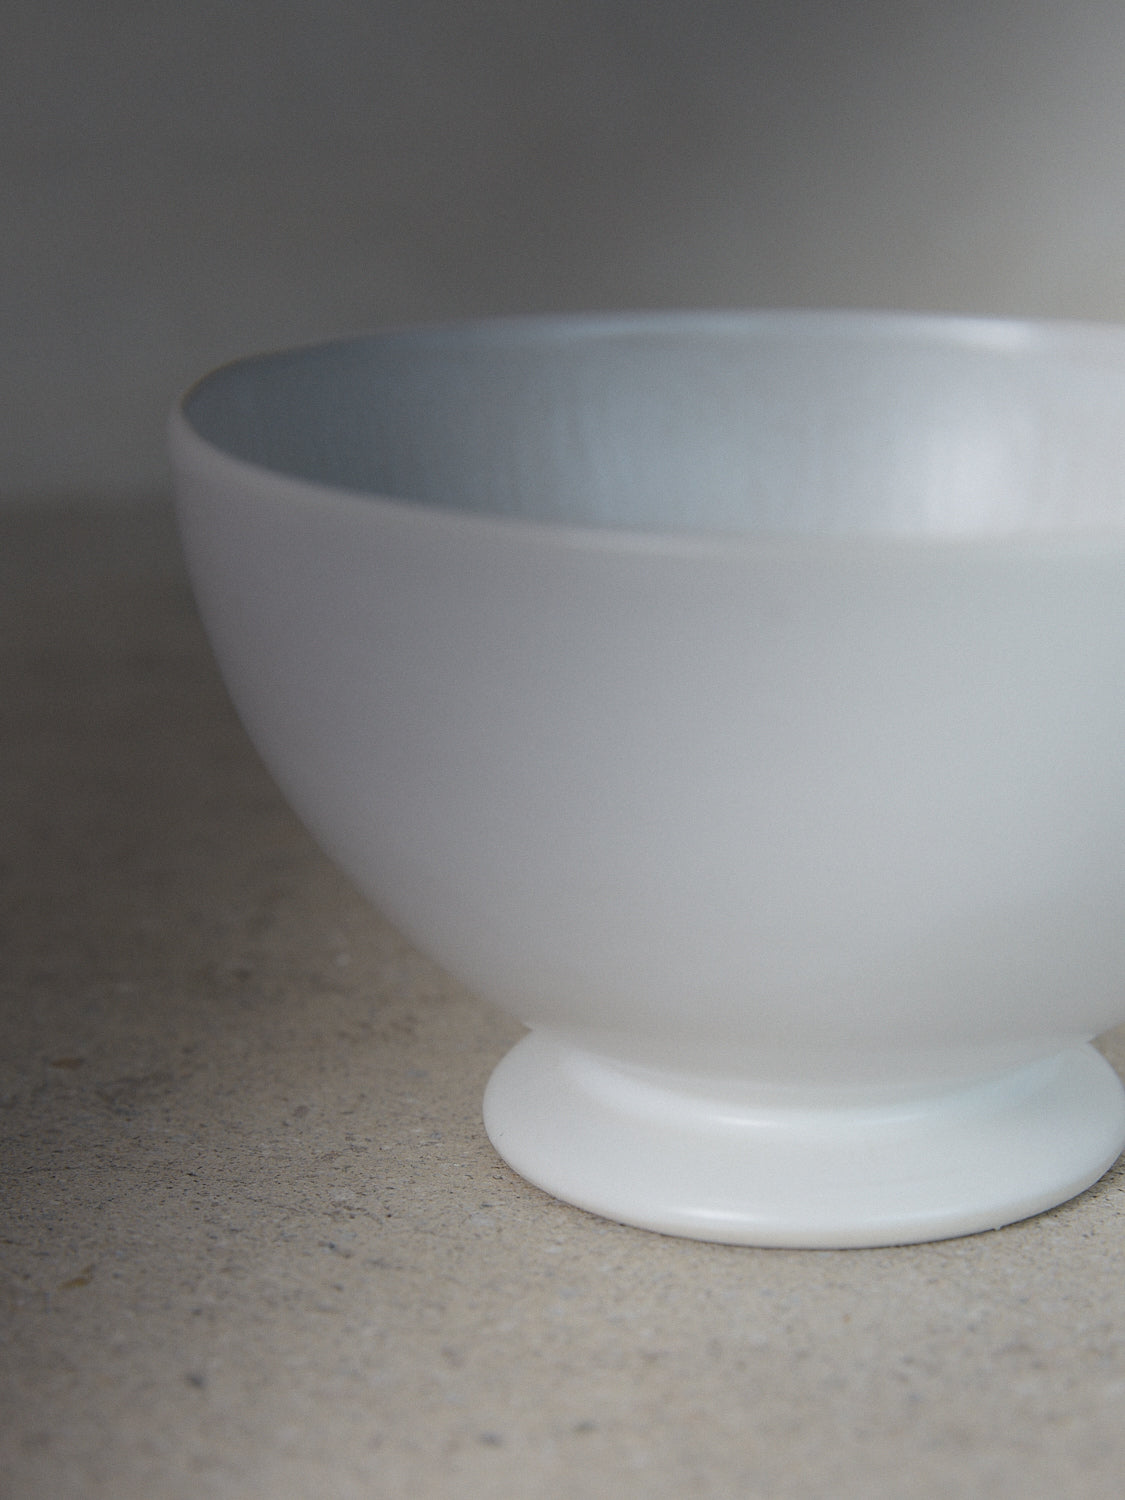 Raw Latte Bowl. Exclusively ours. Traditional hand sculpted French footed latte bowl in  matte, milky white stoneware.